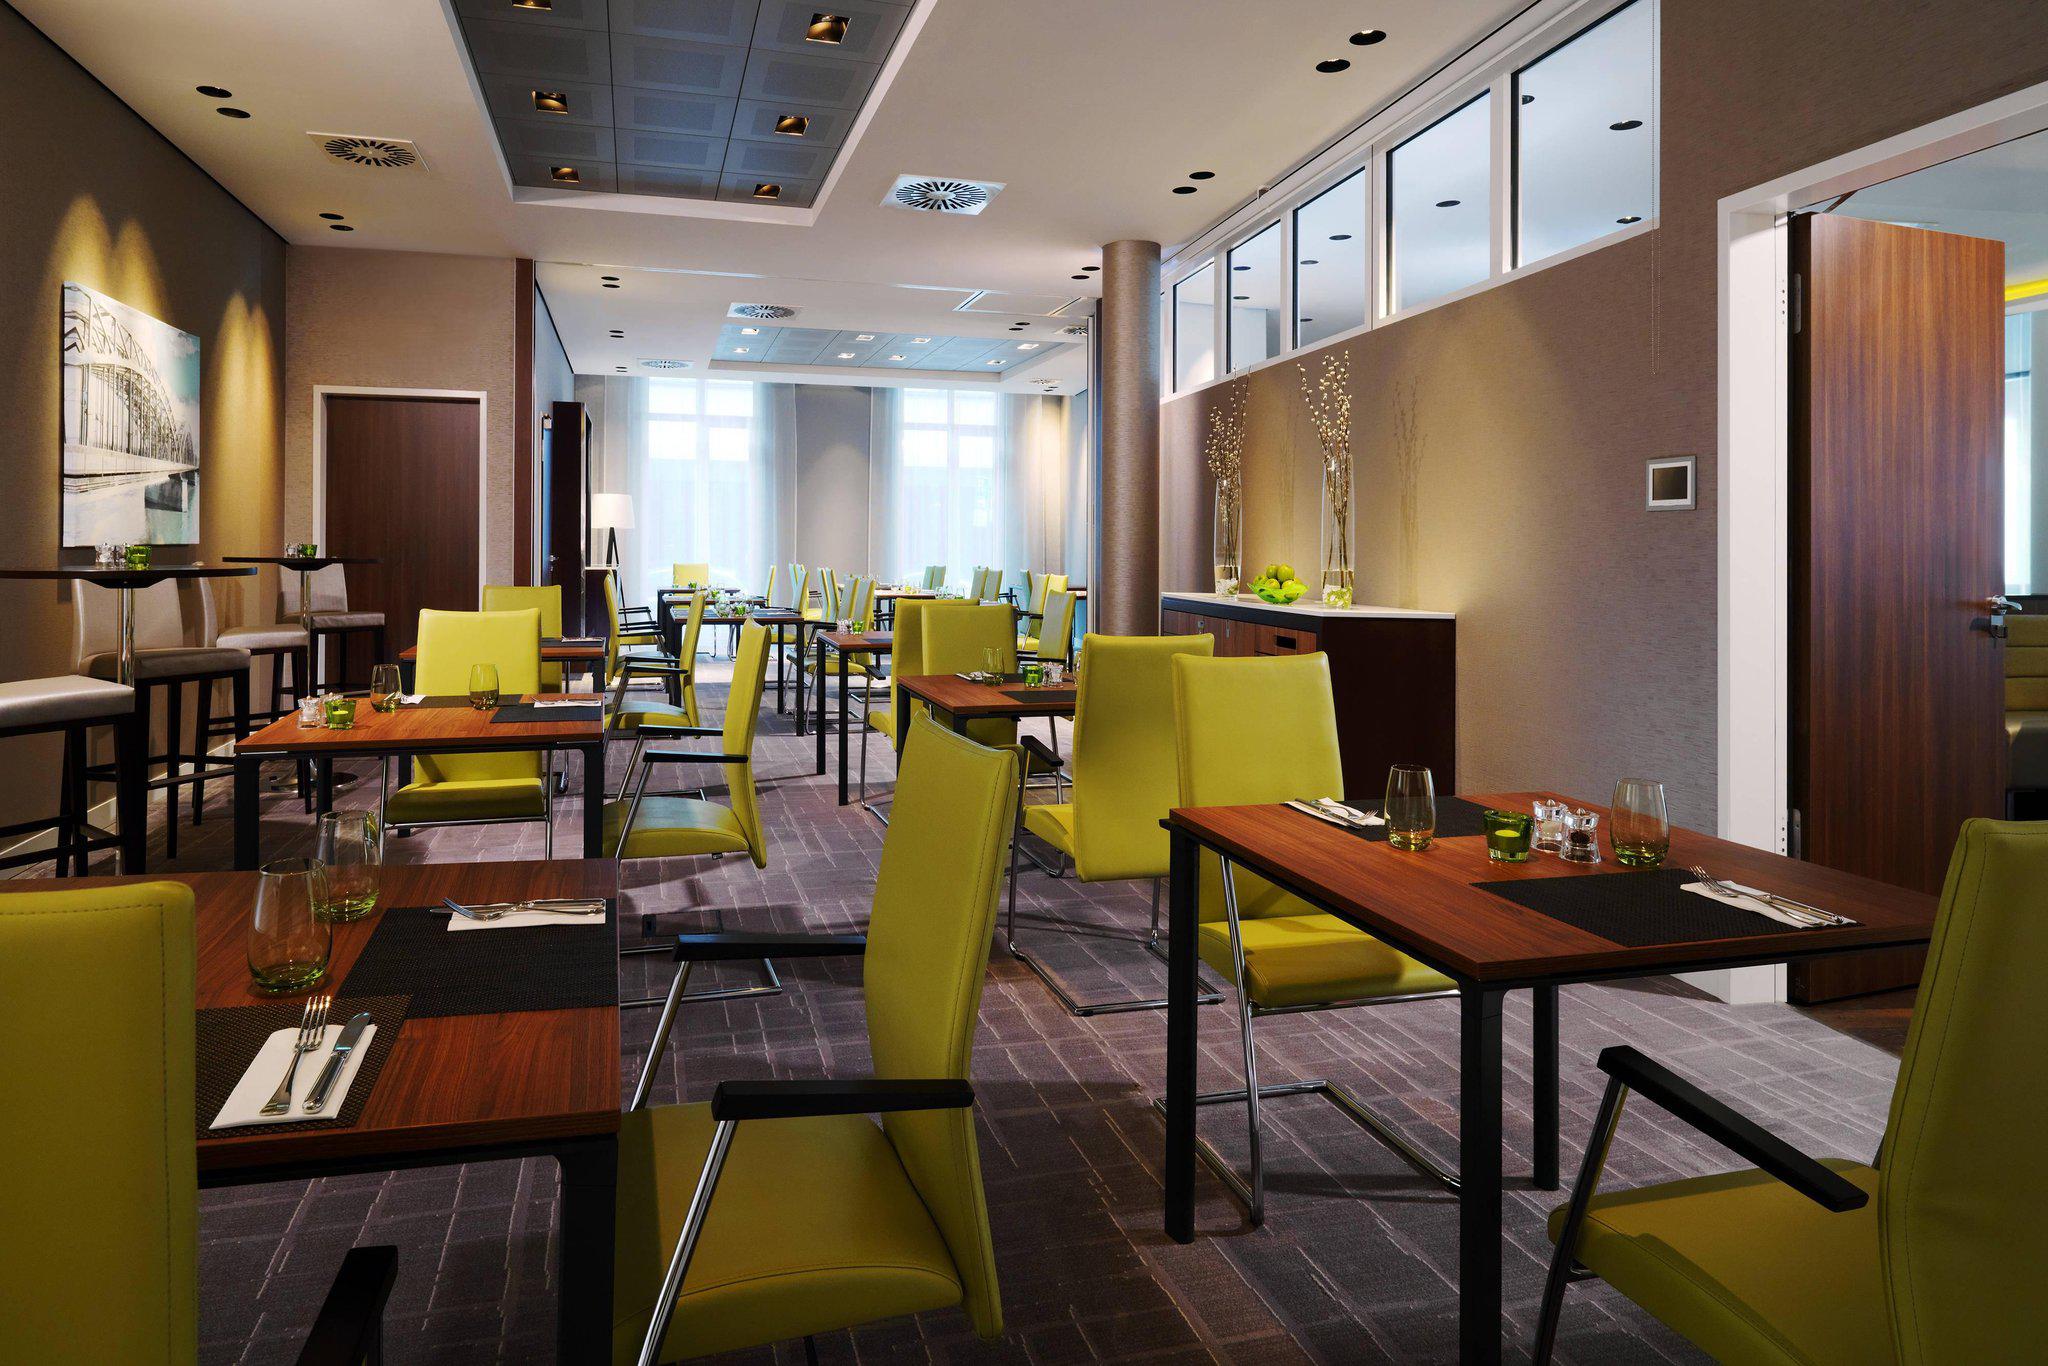 Courtyard by Marriott Cologne, Dagobertstrasse 23 in Cologne